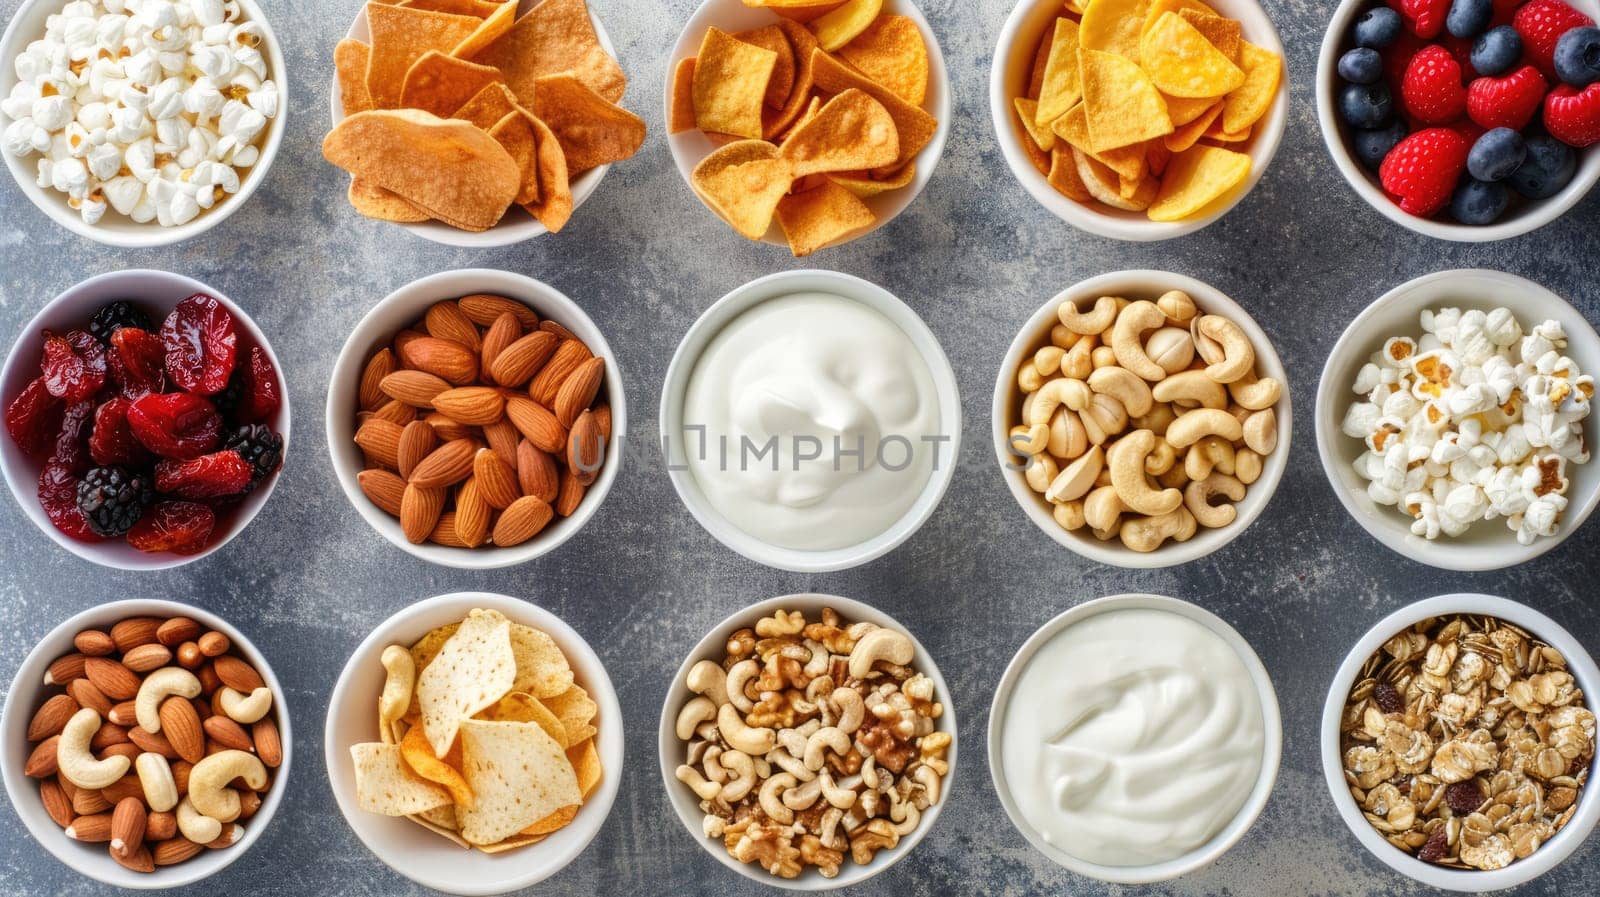 Mix of snacks. Variety of snacks such as nuts, chips and popcorn. AI